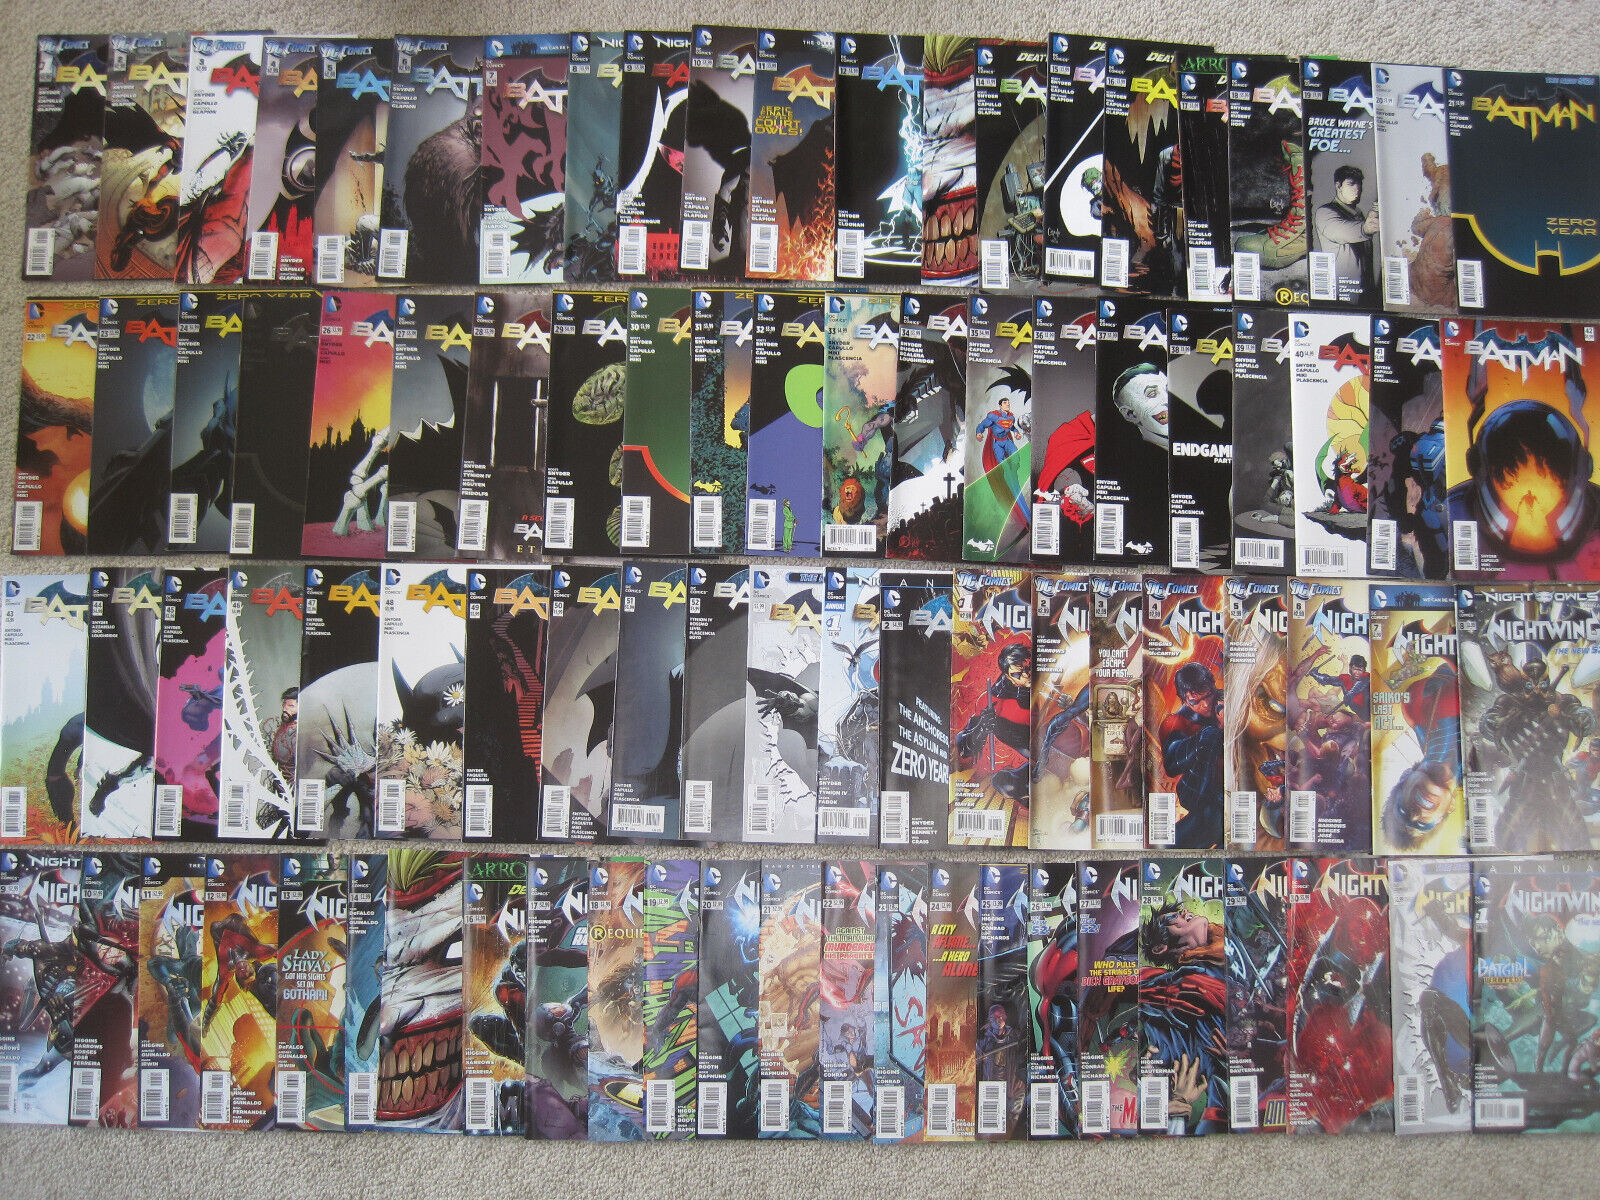 New 52 (2011) complete runs of Batman (1 - 52) and Nightwing (1 - 30) DC comics